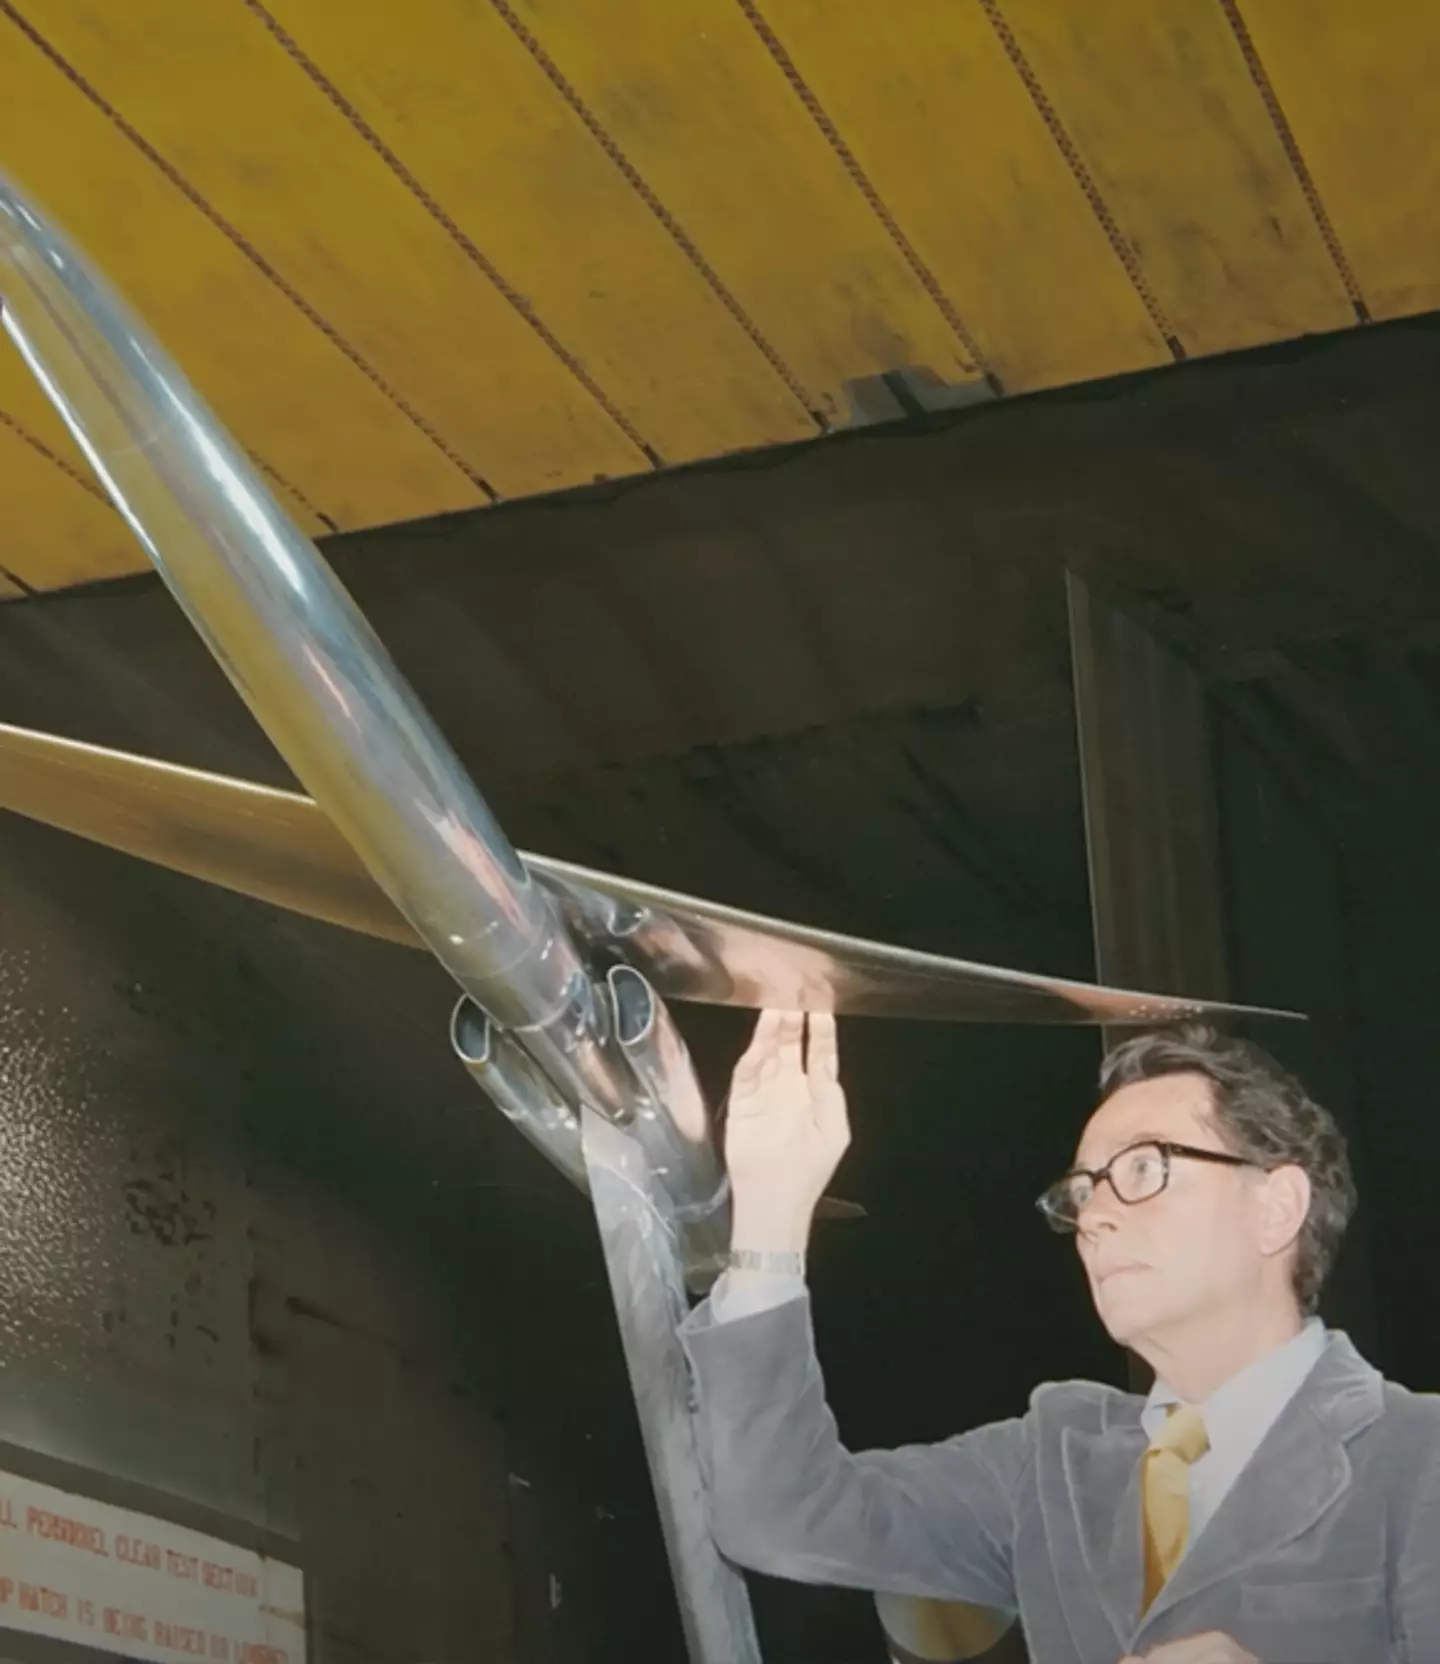 The oblique wing design was suitable for flying at both subsonic and supersonic speeds / Mustard/YouTube